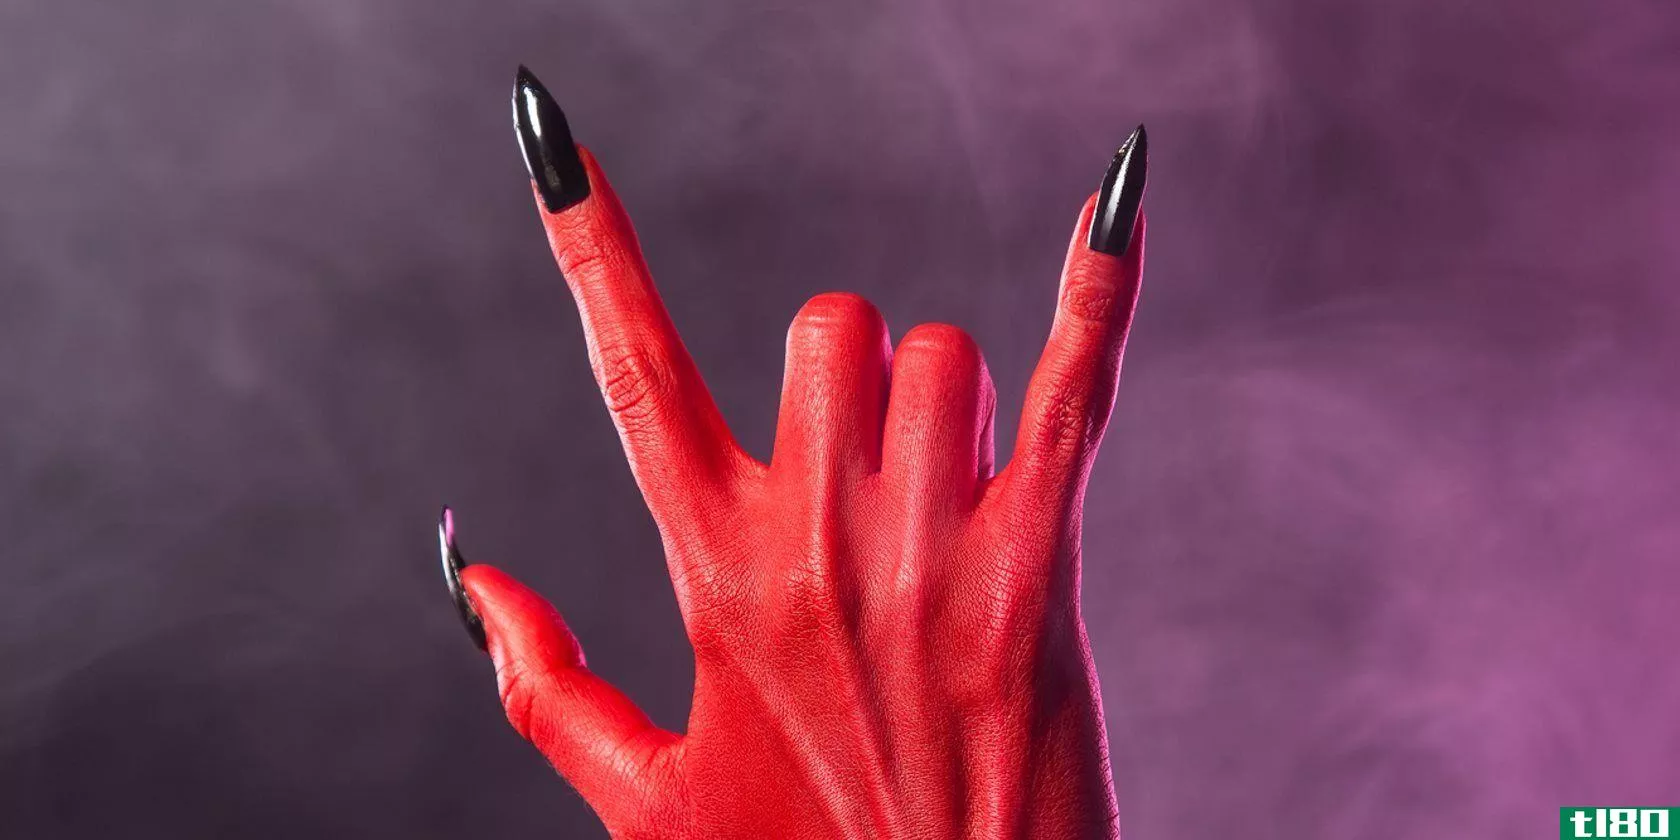 heavy-metal-gesture-red-devil-hand-with-black-nails-halloween